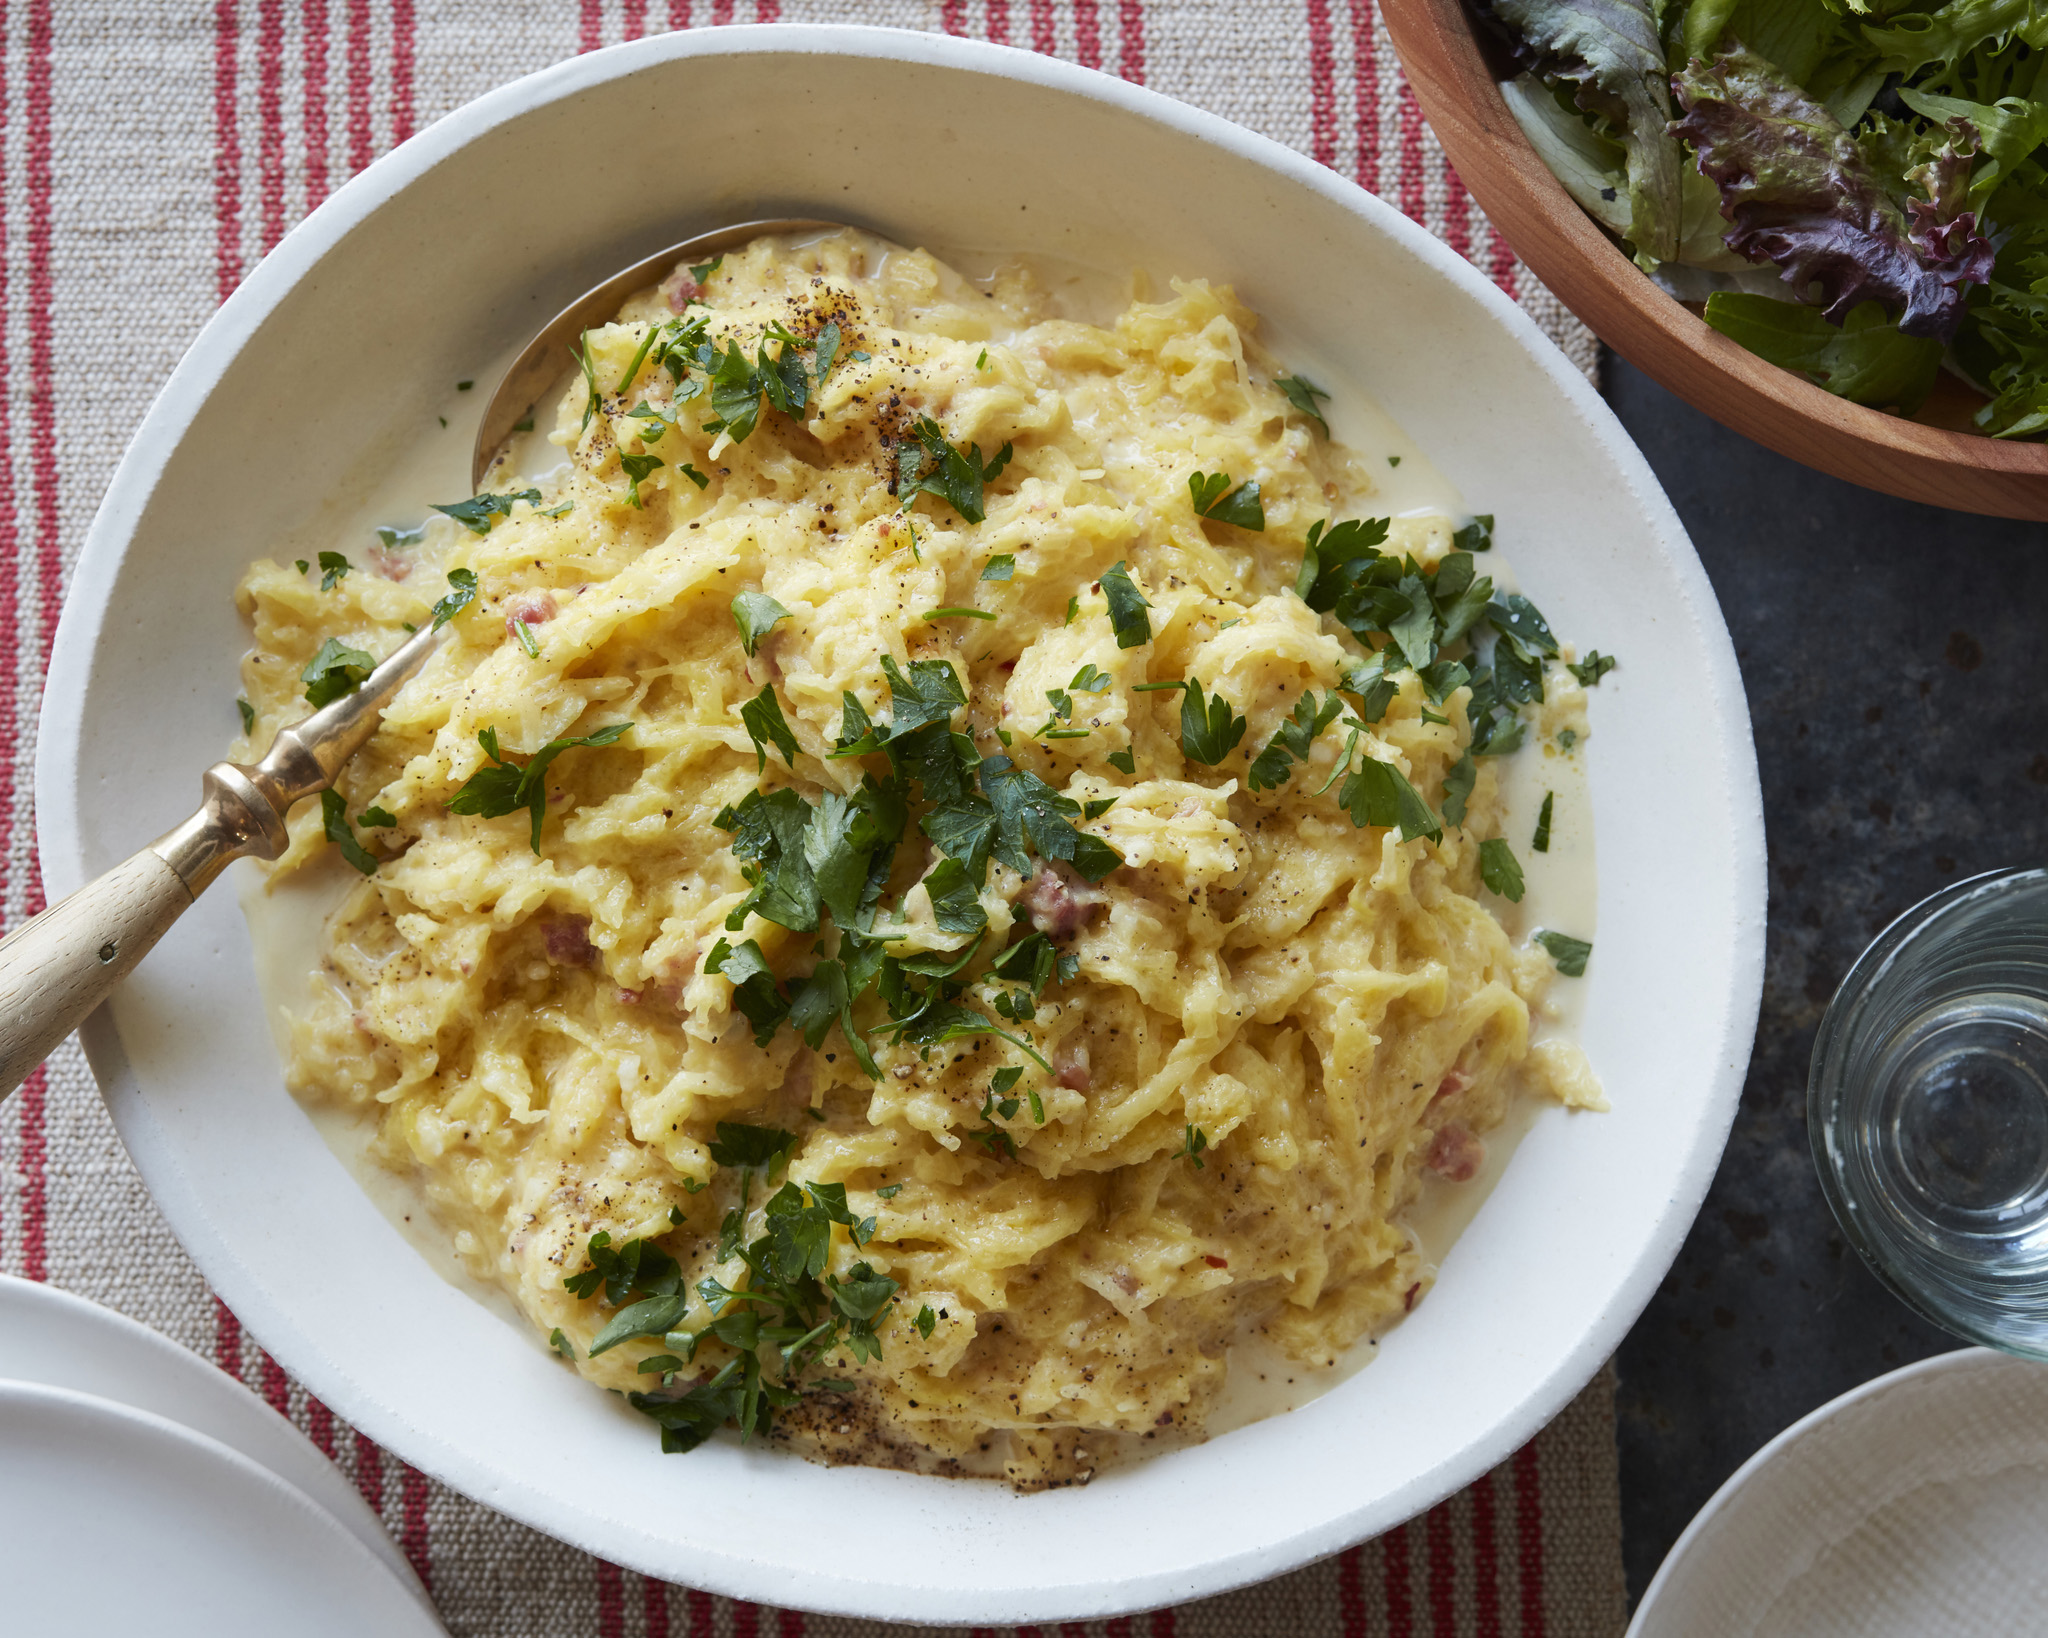 PHOTO: Substitute spaghetti squash for pasta to make a carbonara that is full of fall ingredients.